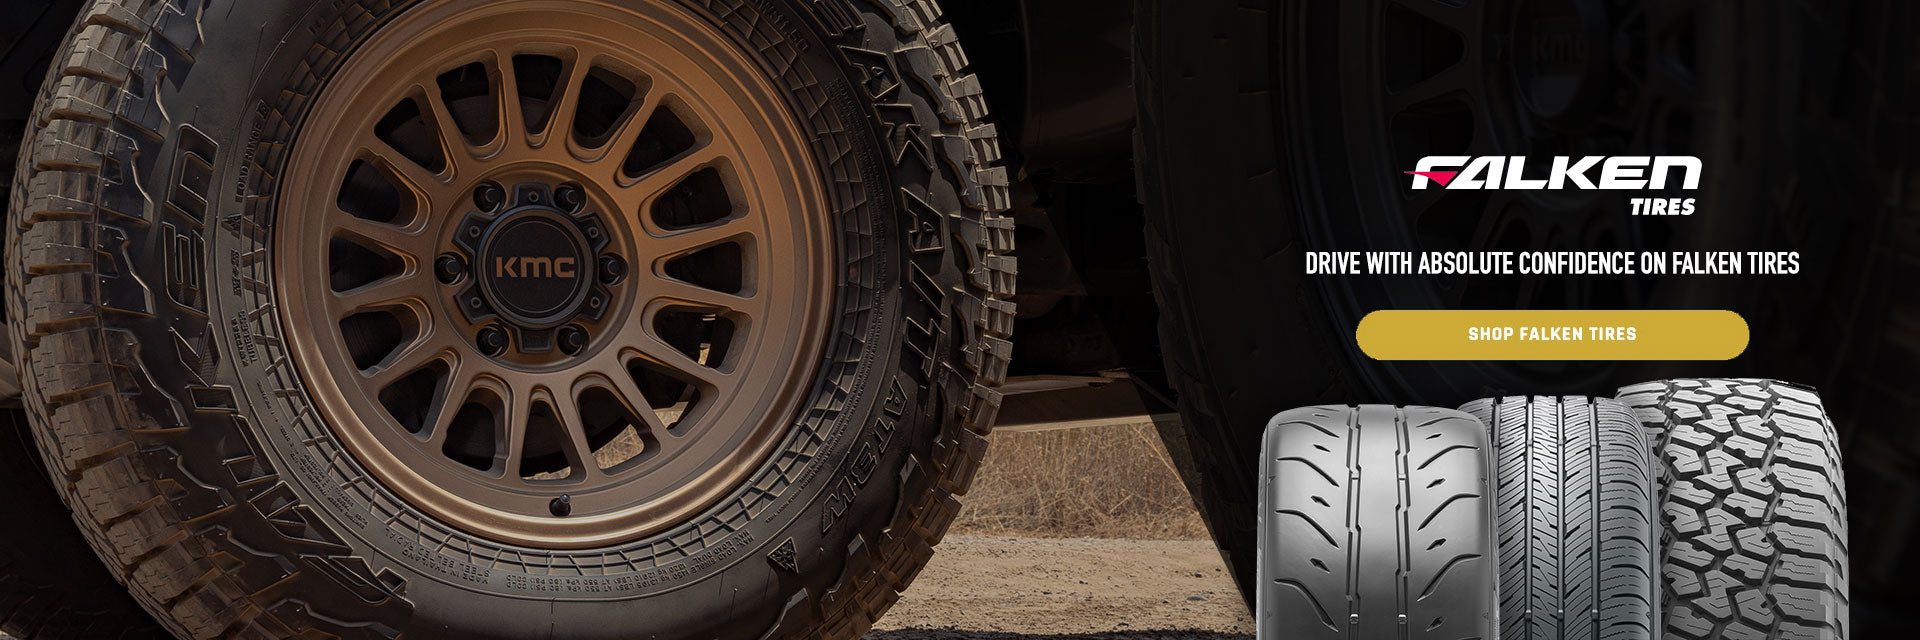 Drive with absolute confidence on Falken Tires